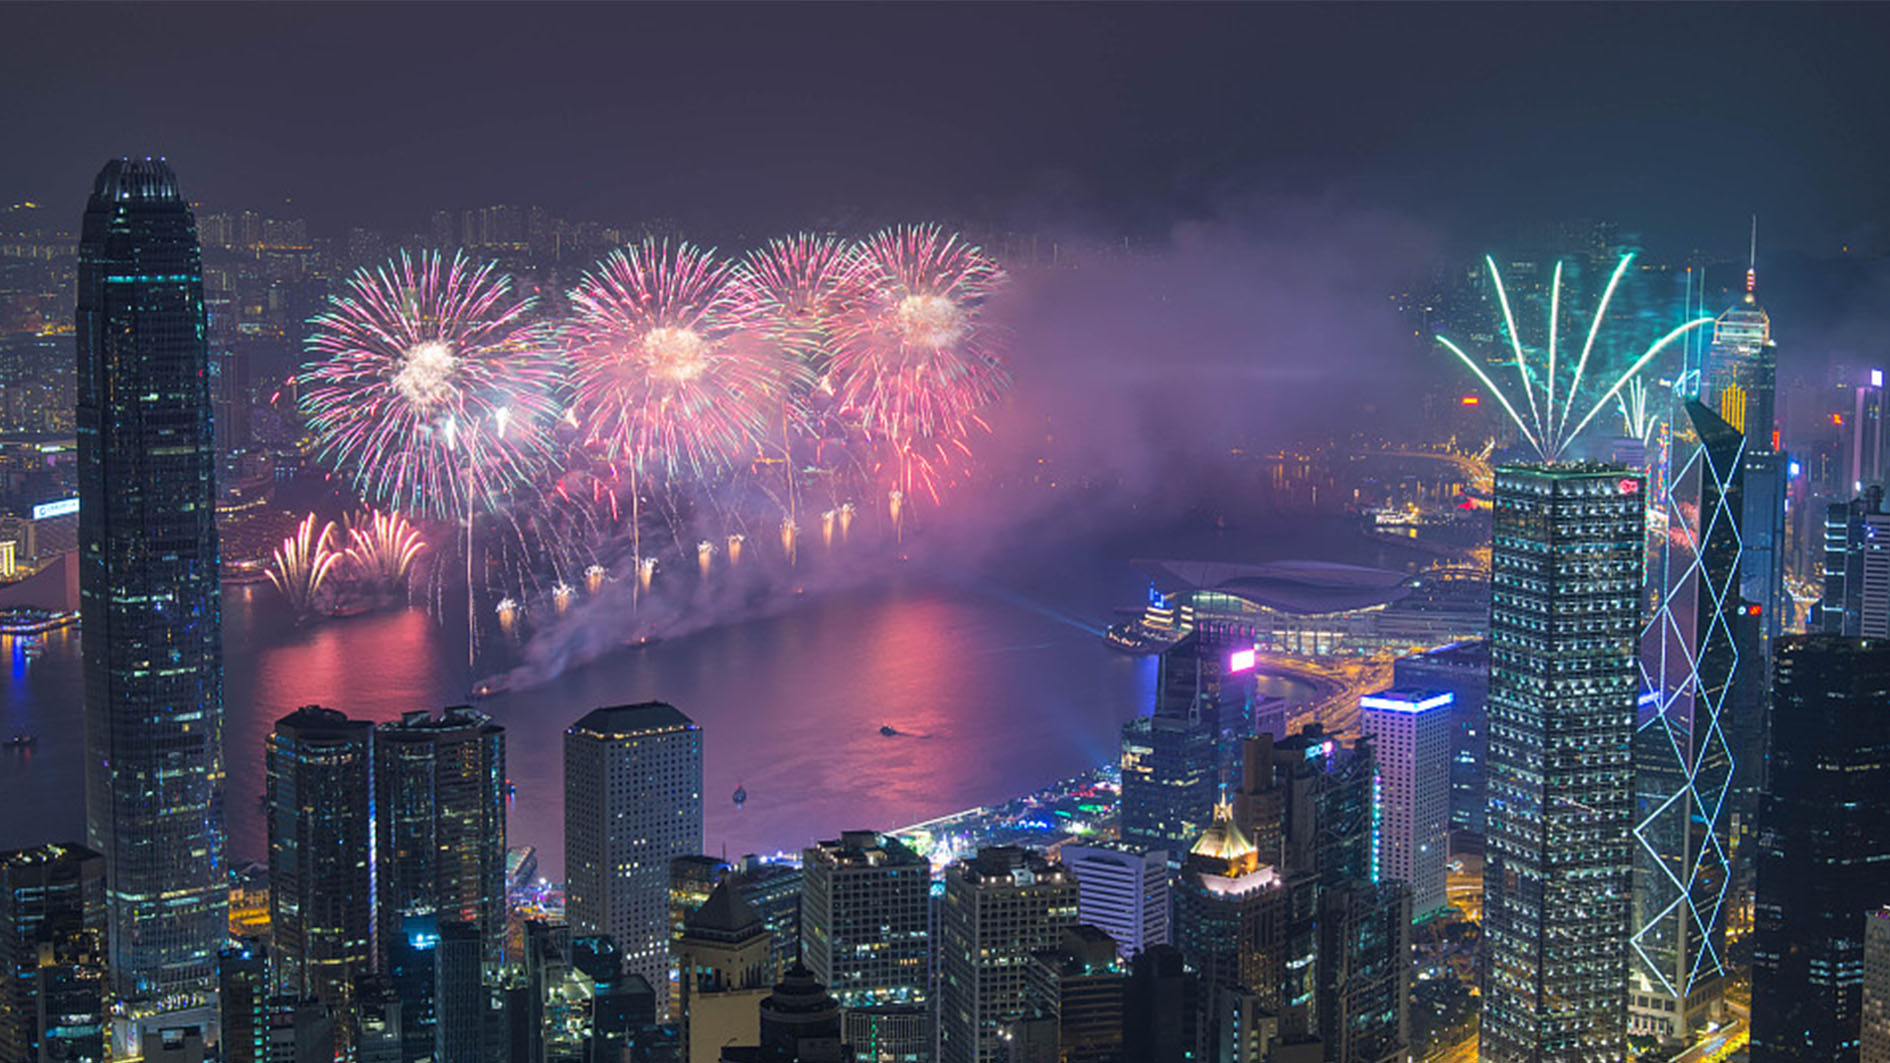 hong-kong-holds-fireworks-show-to-celebrate-lunar-new-year-cgtn